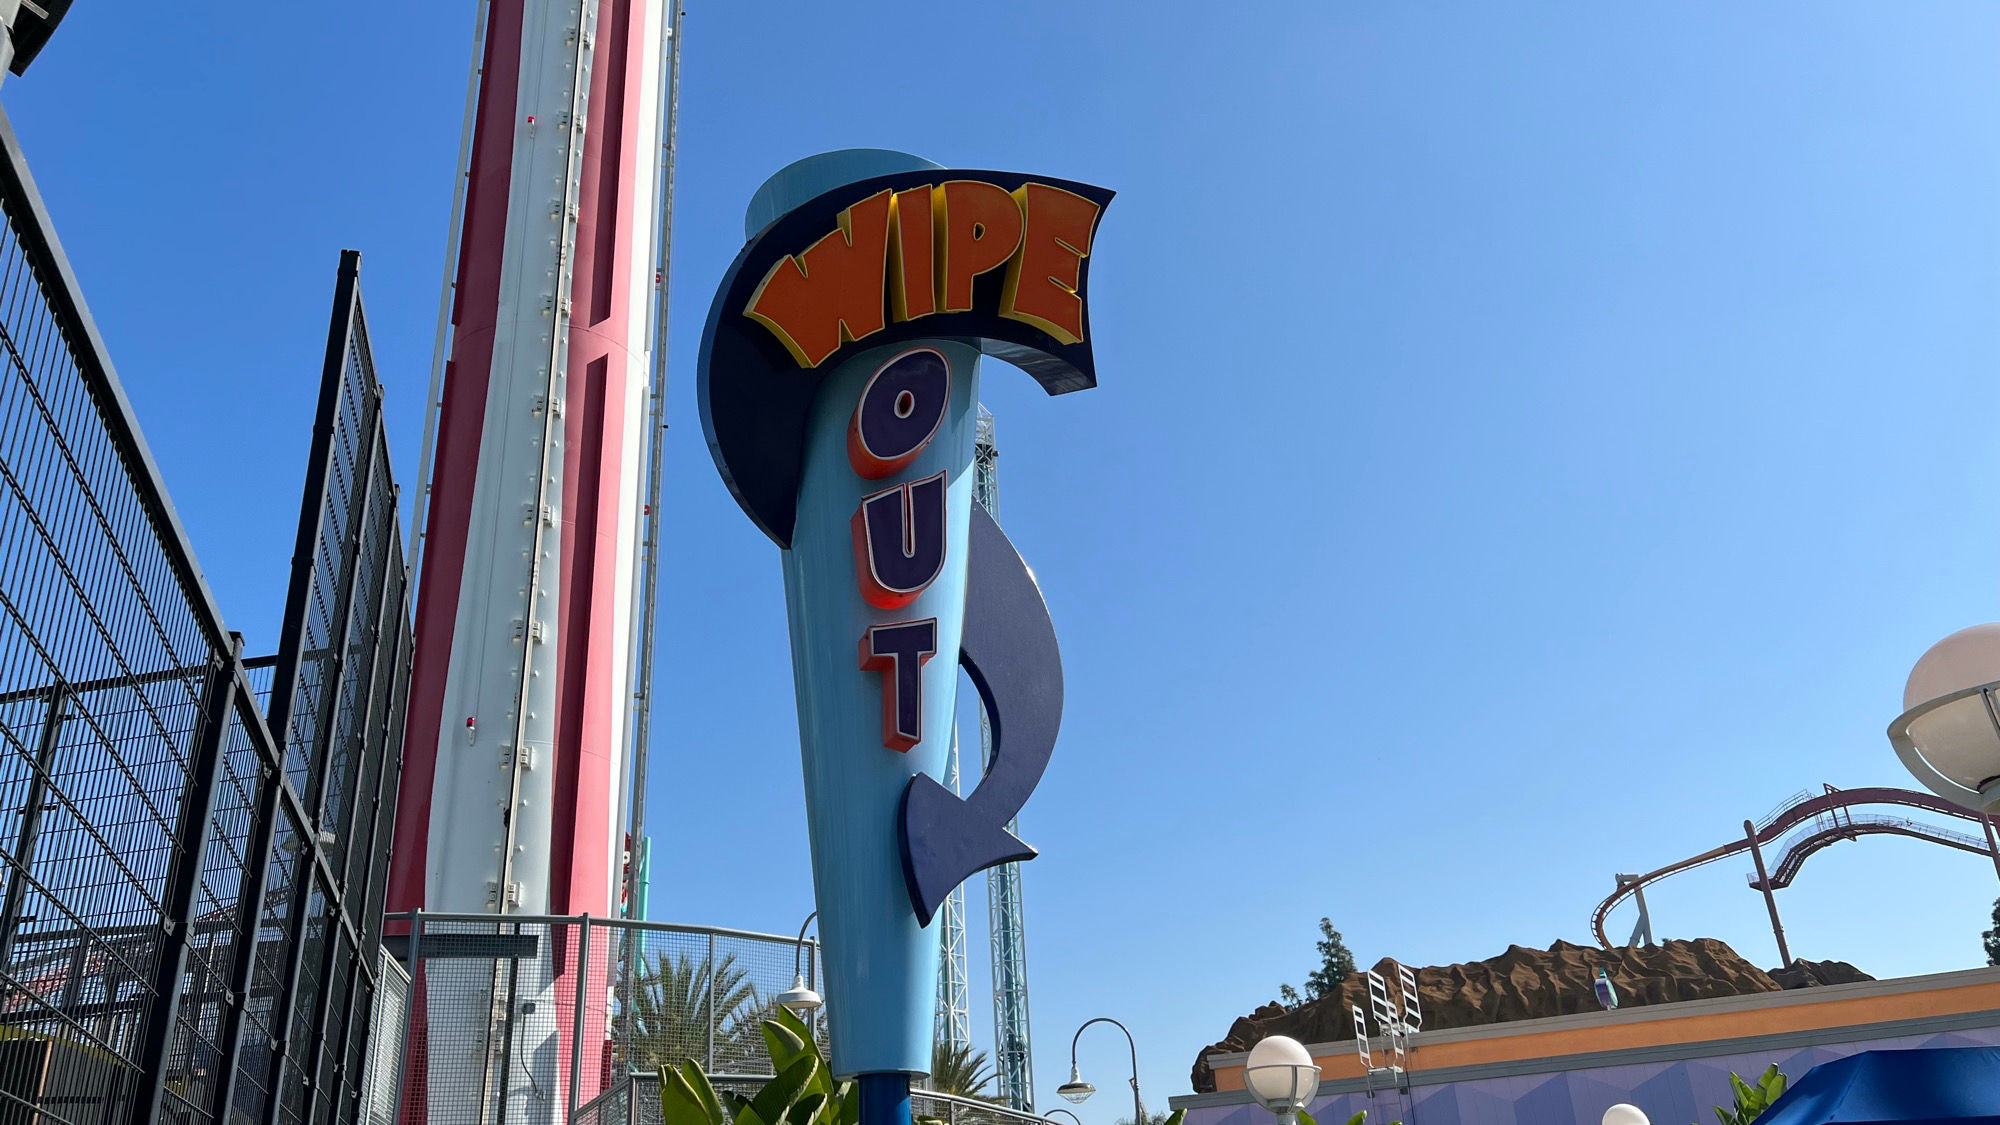 WipeOut Sign